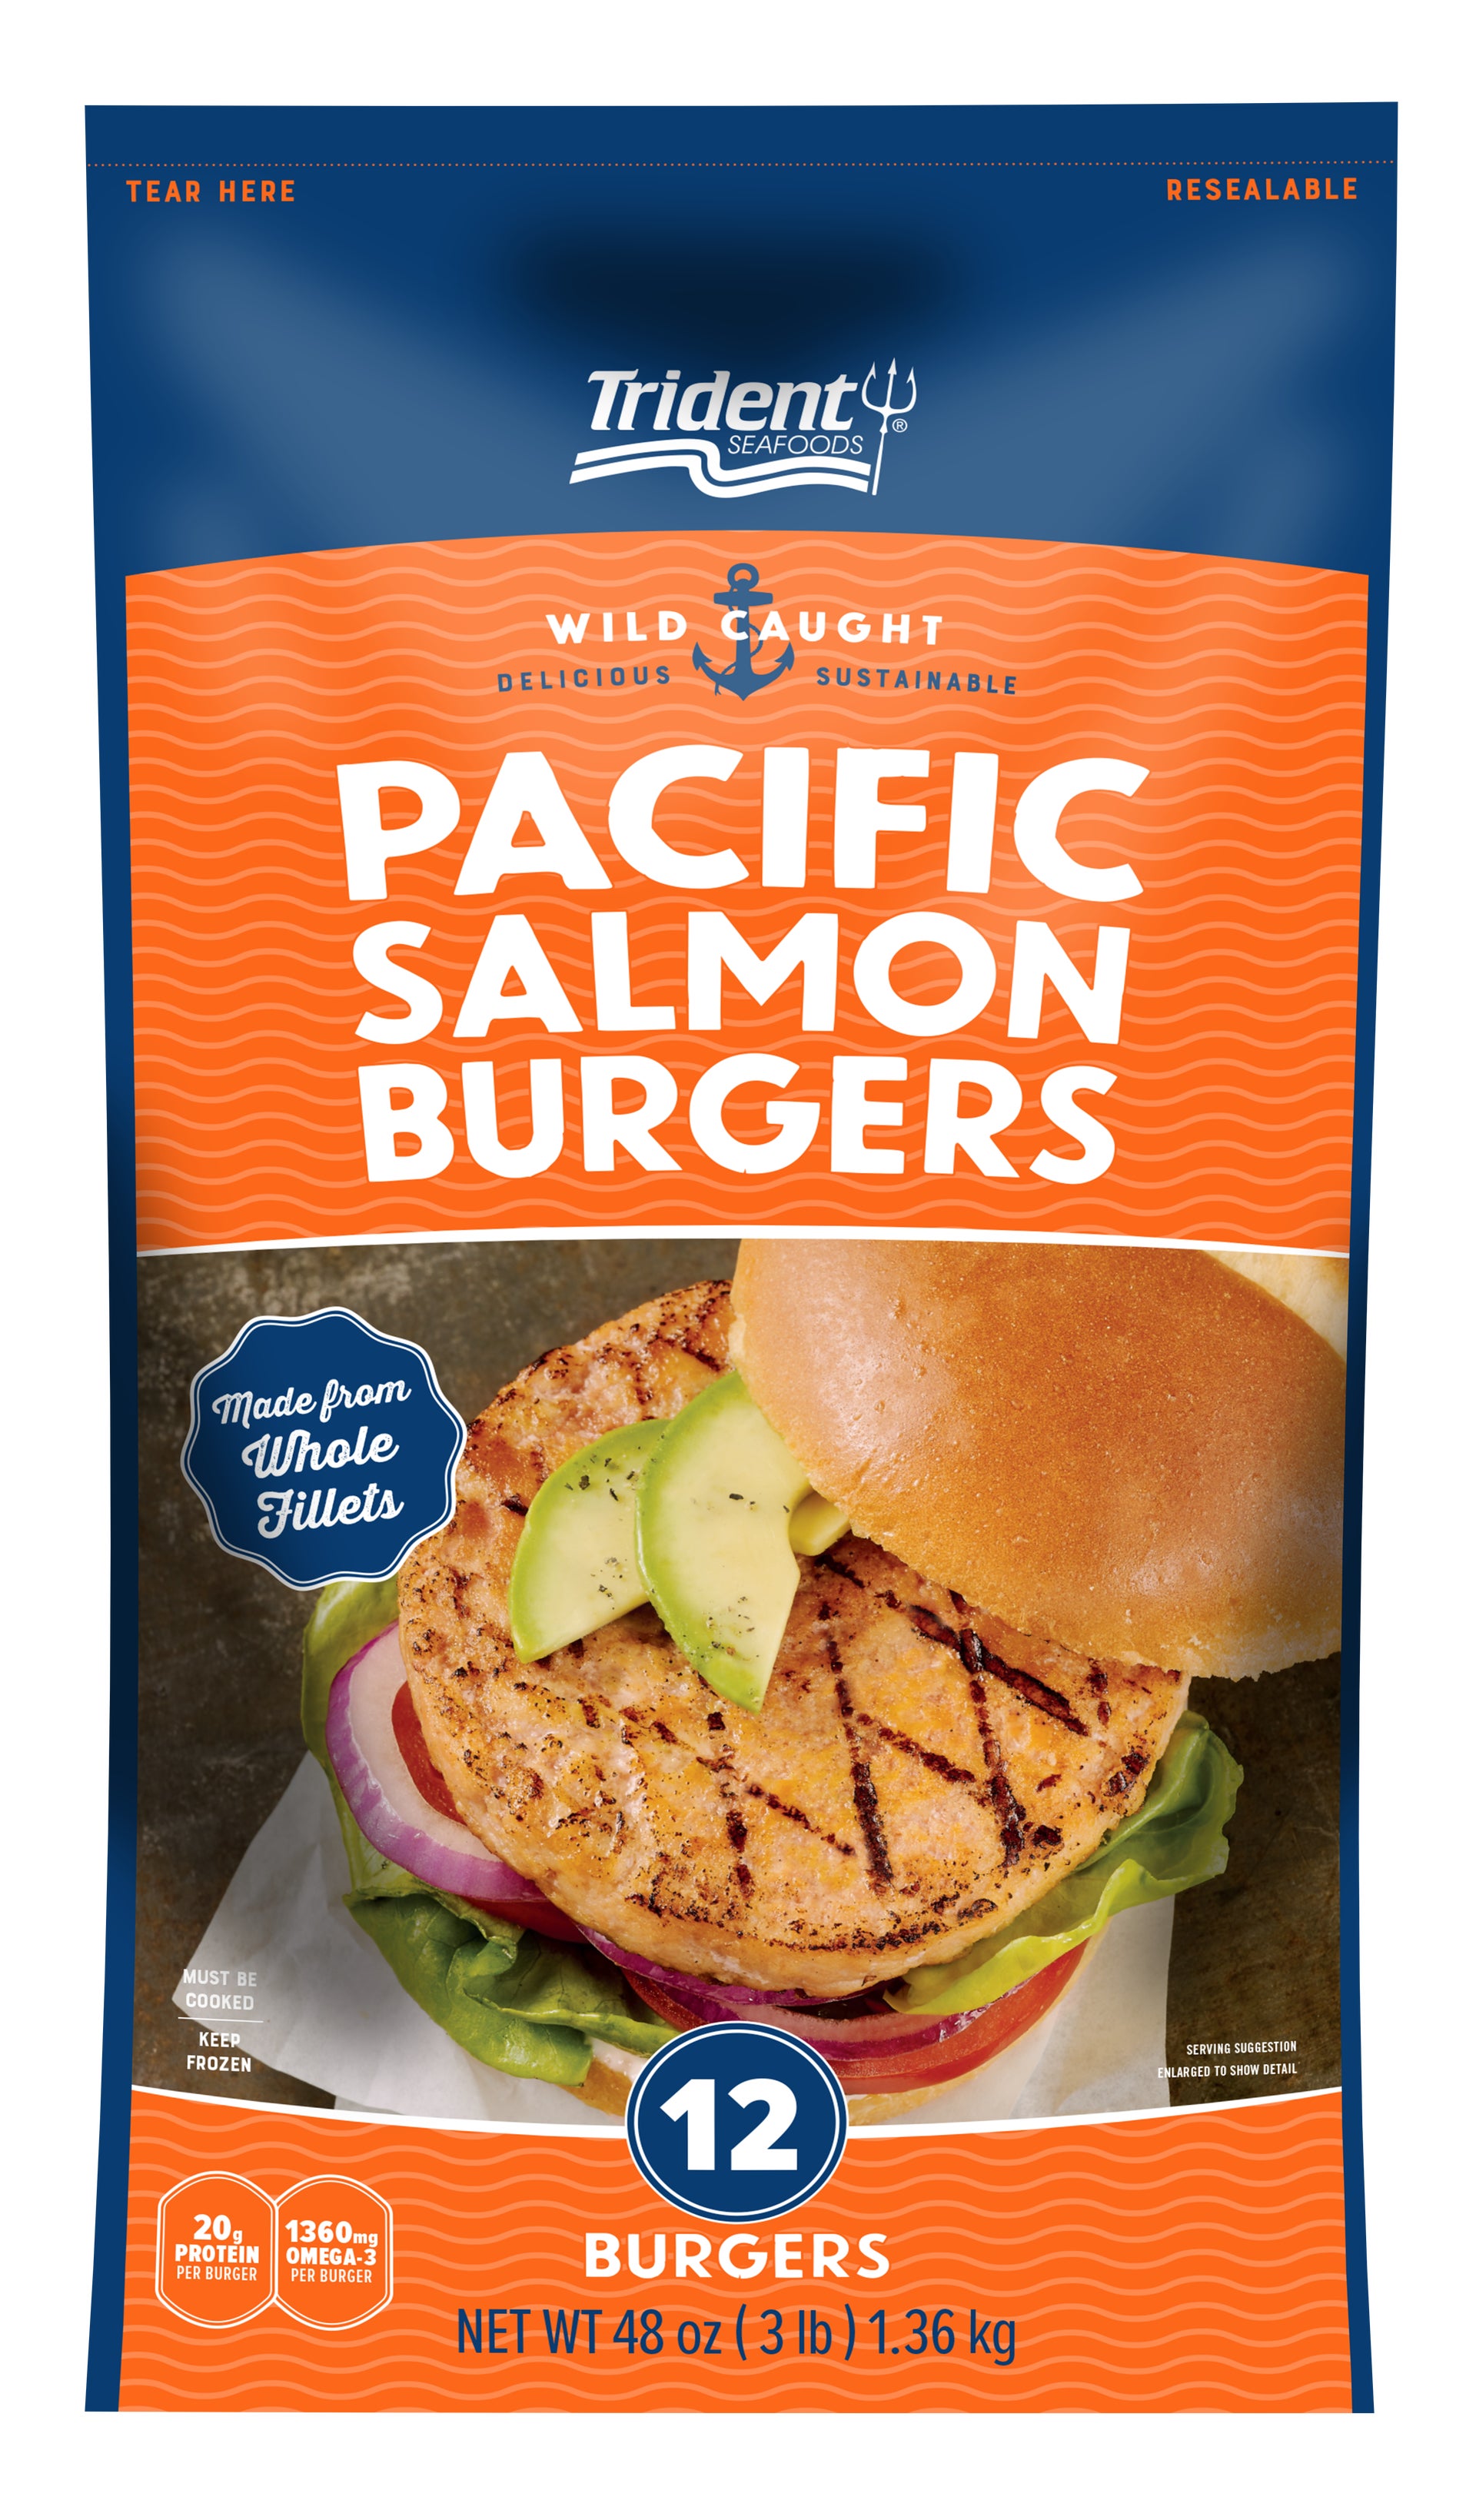 Pacific Salmon Burgers Packaging